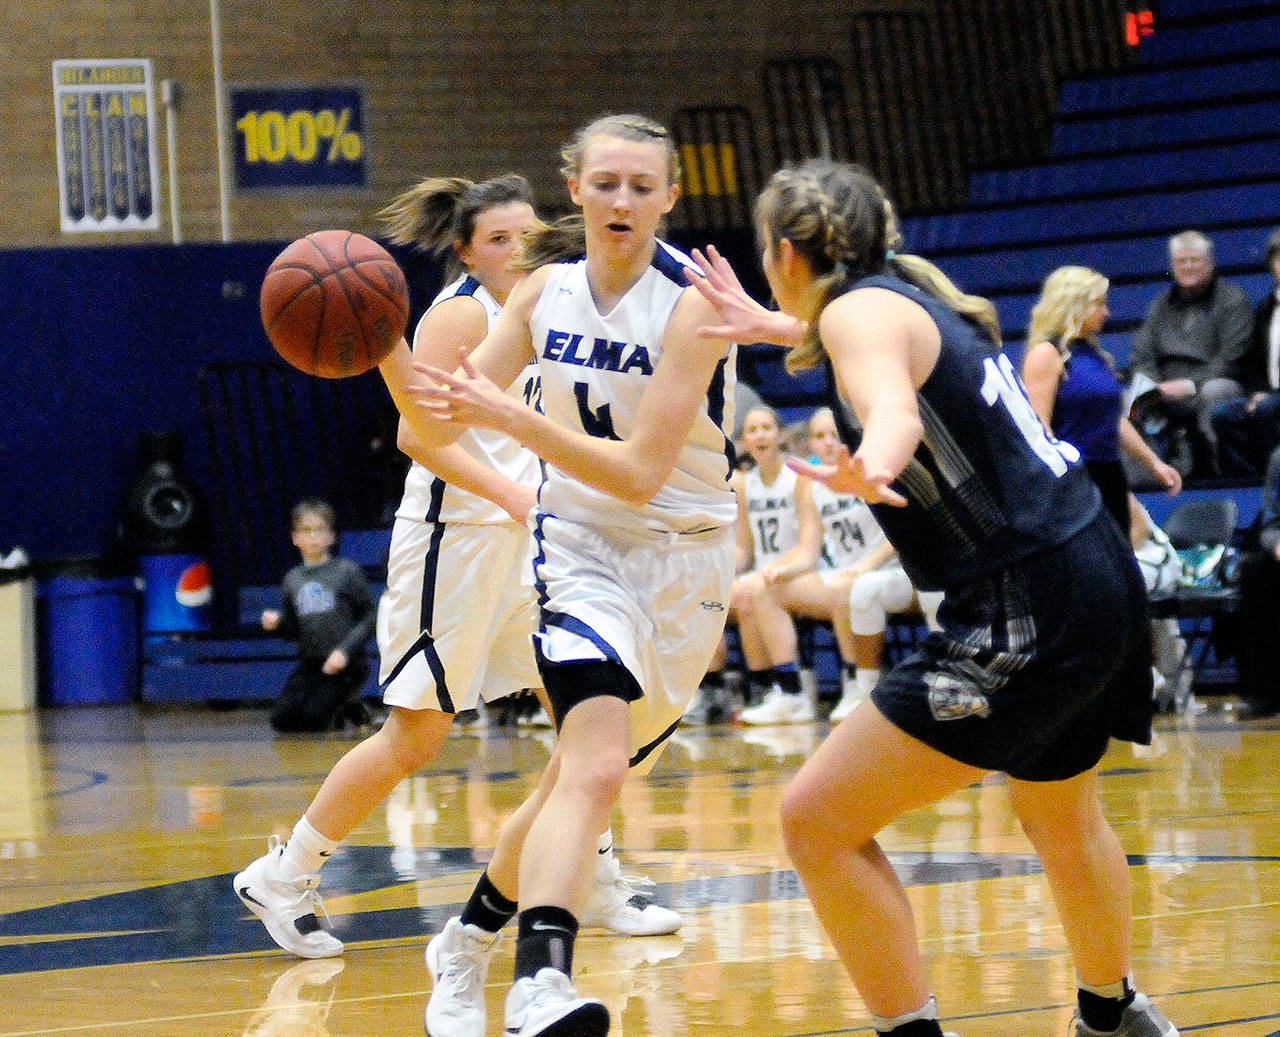 Elma point guard Jillian Bieker, left, makes a pass against Northwest Christian in the 1A District IV championship game on Feb. 16. Elma opens 1A State Tournament play against Overlake on Wednesday at the SunDome in Yakima. (Hasani Grayson | Grays Harbor News Group)